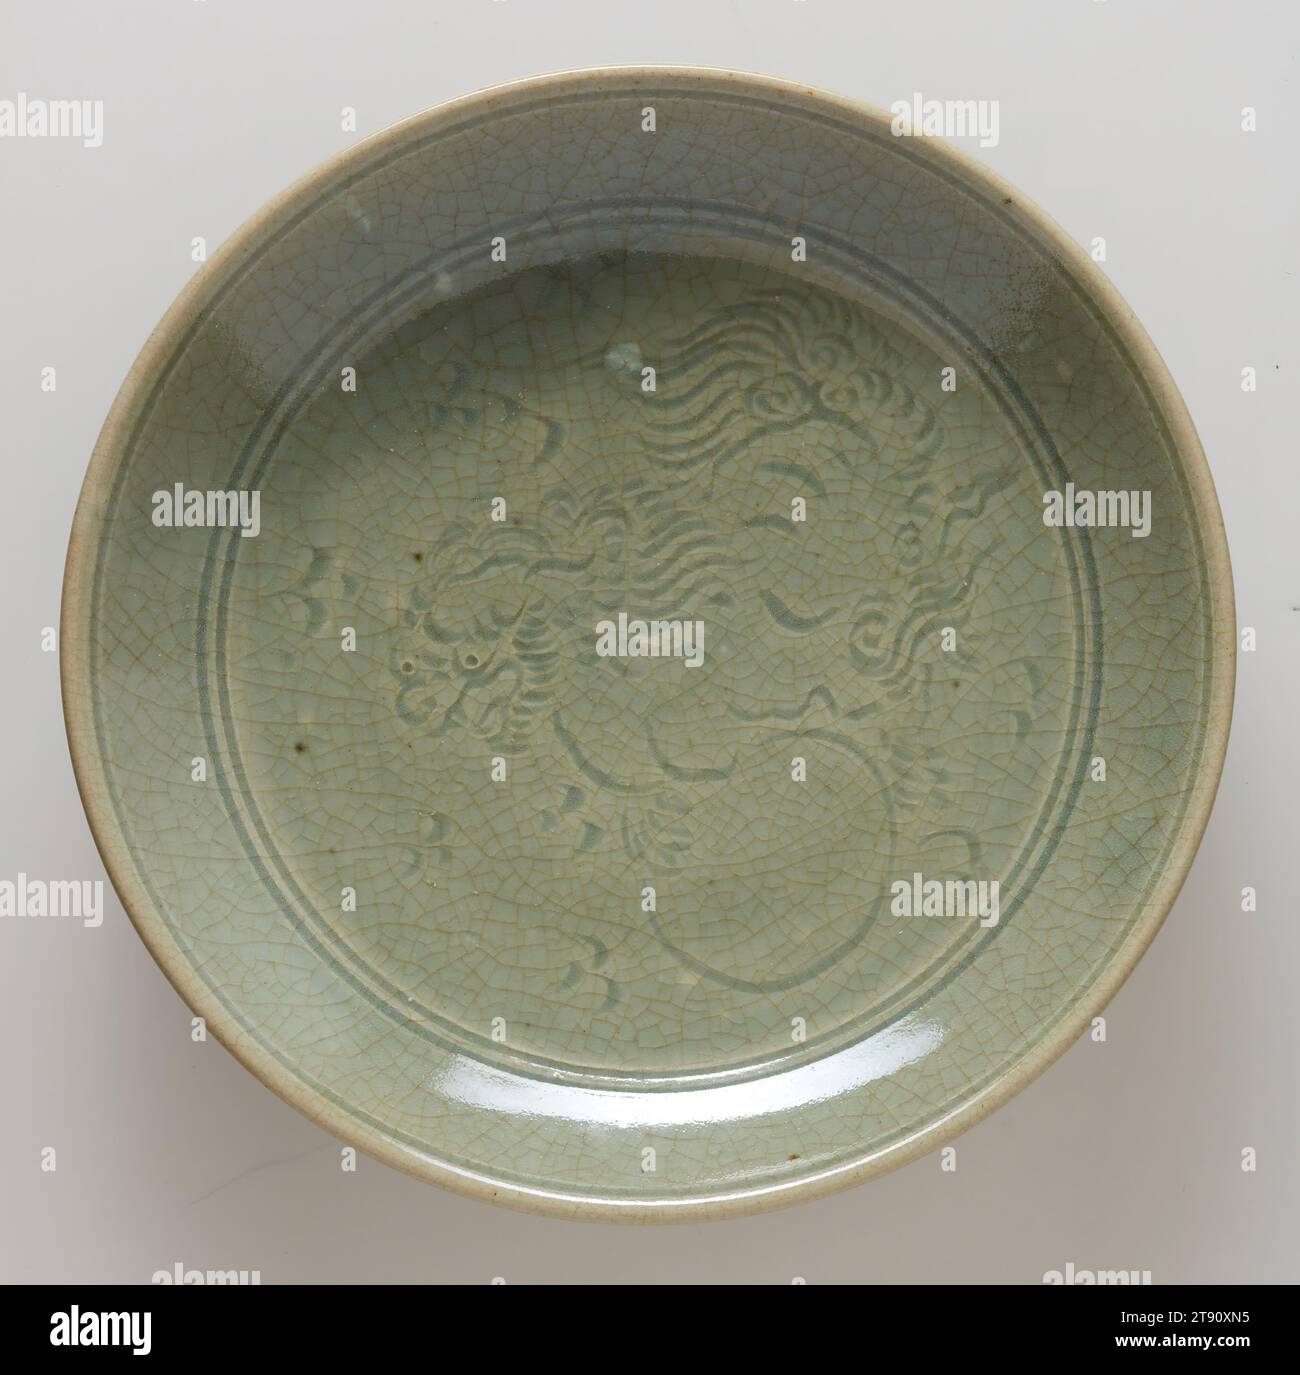 Plate, 1368-1644, Hsien Lu, Chinese, 2 3/8 x 11 1/4 in. (6.03 x 28.58 cm), Lung Chuan ware Celadon, ceramic, China, 14th-17th century Stock Photo